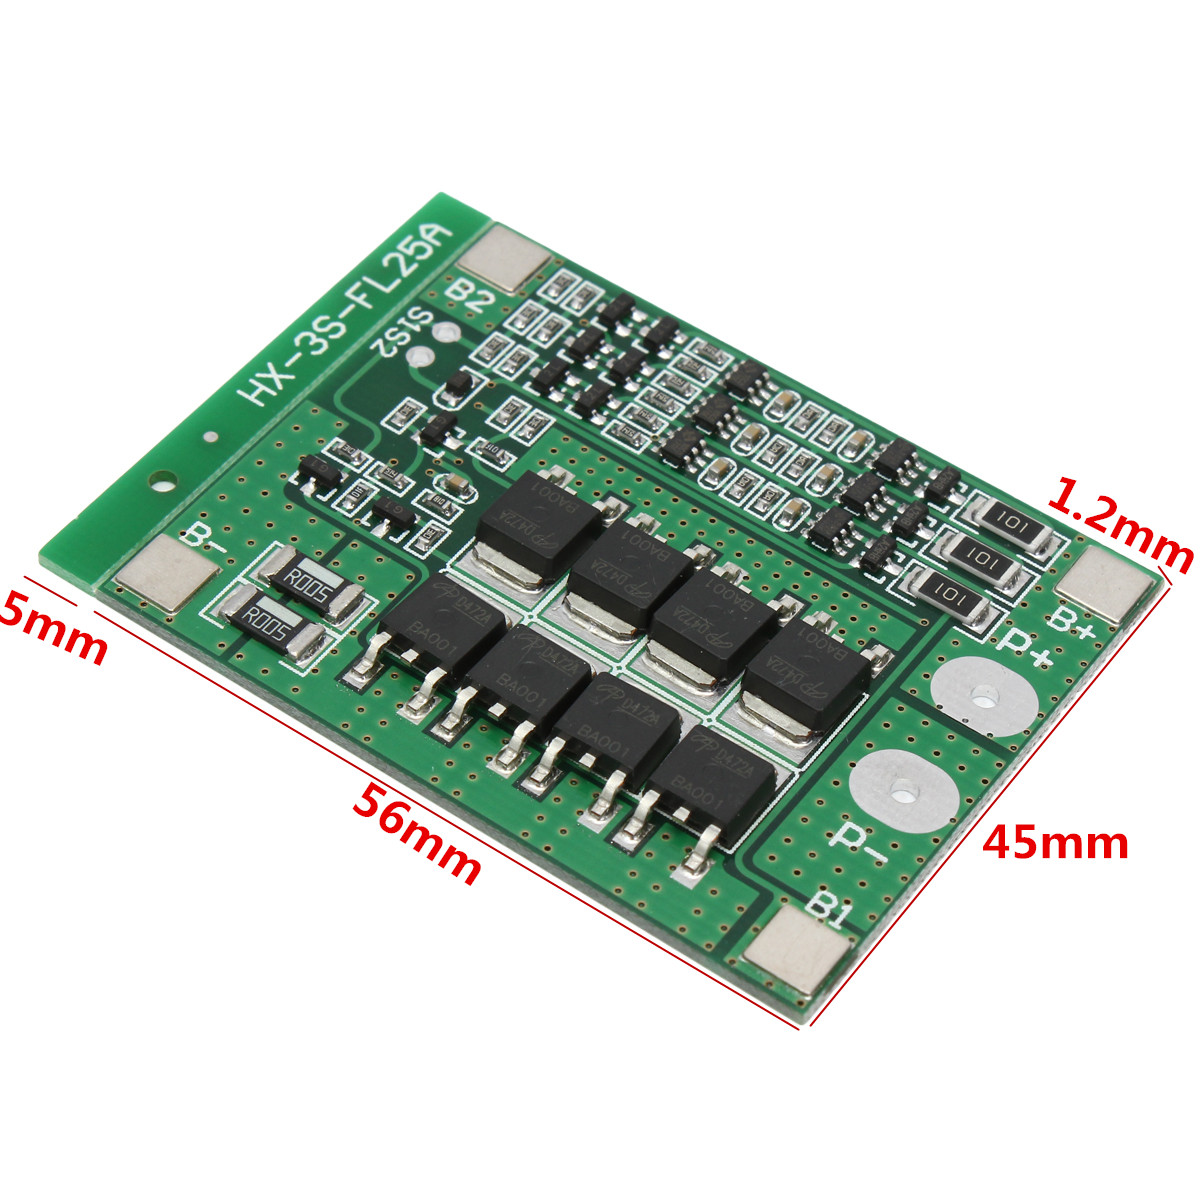 50pcs-3S-111V-25A-18650-Li-ion-Lithium-Battery-BMS-Protection-PCB-Board-With-Balance-Function-1388425